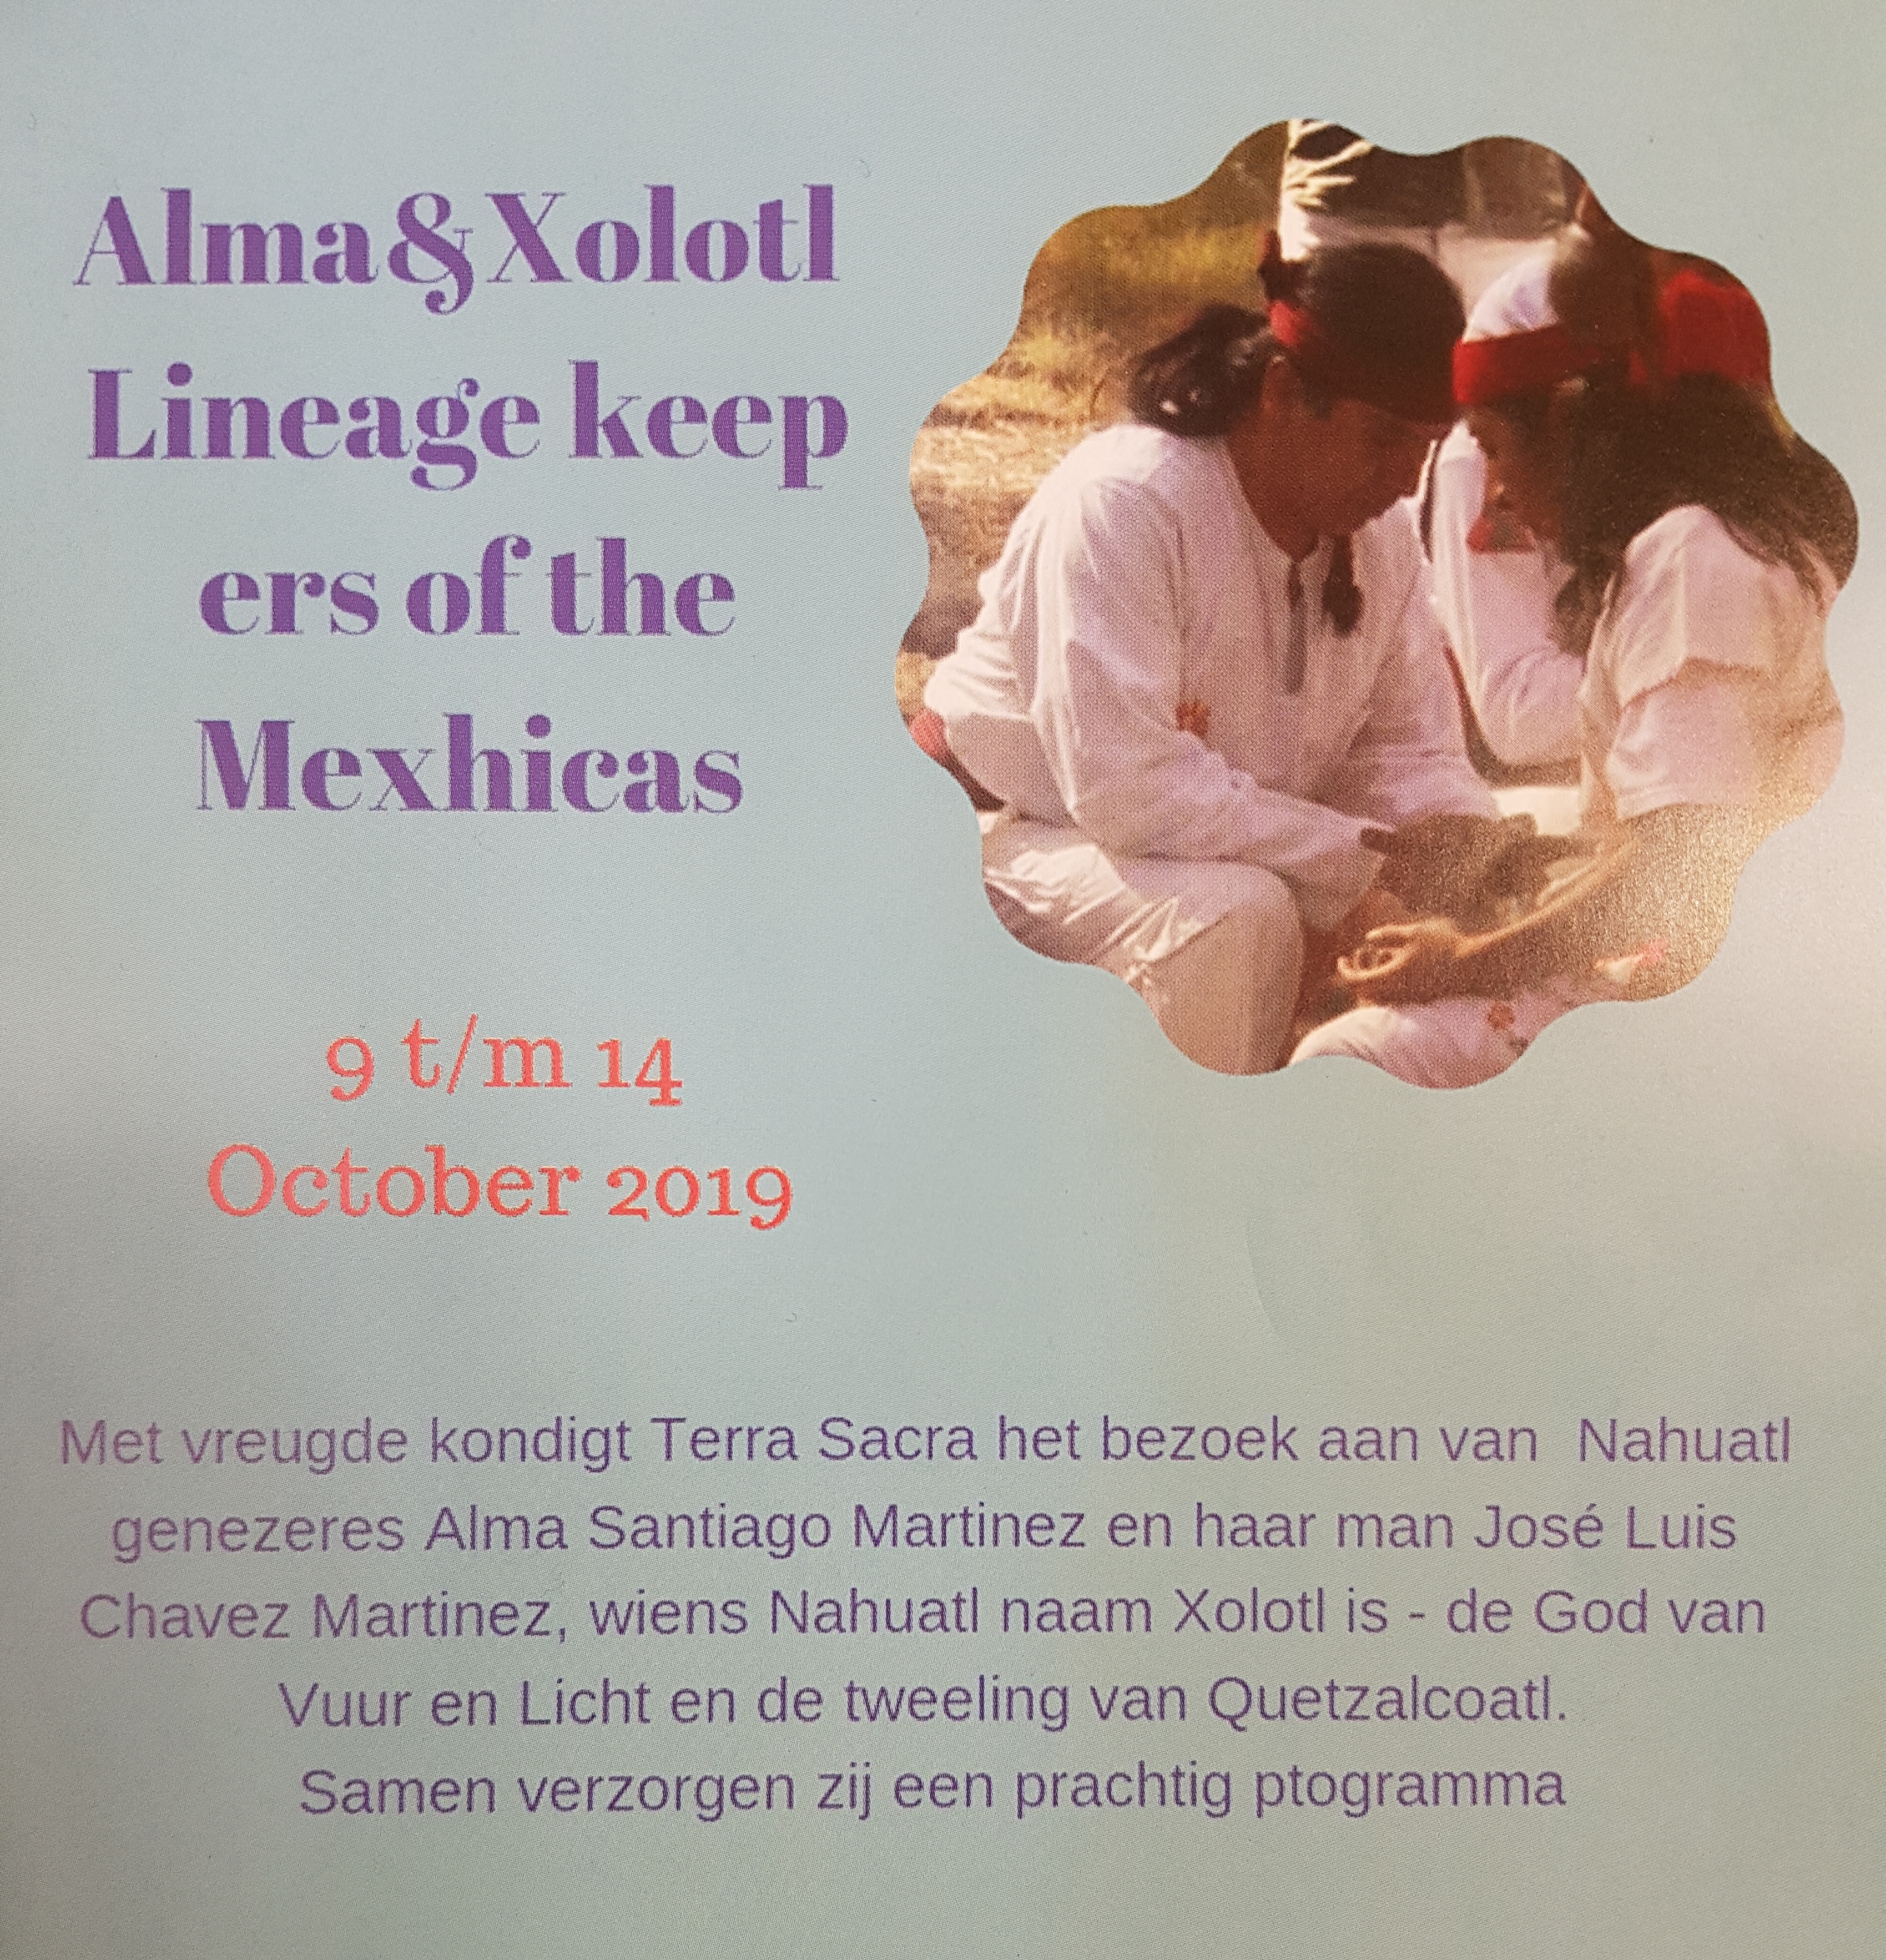 Alma&Xolotl Lineage keepers of the Mexhicas Introductieceremonie met info. over de diverse workshops